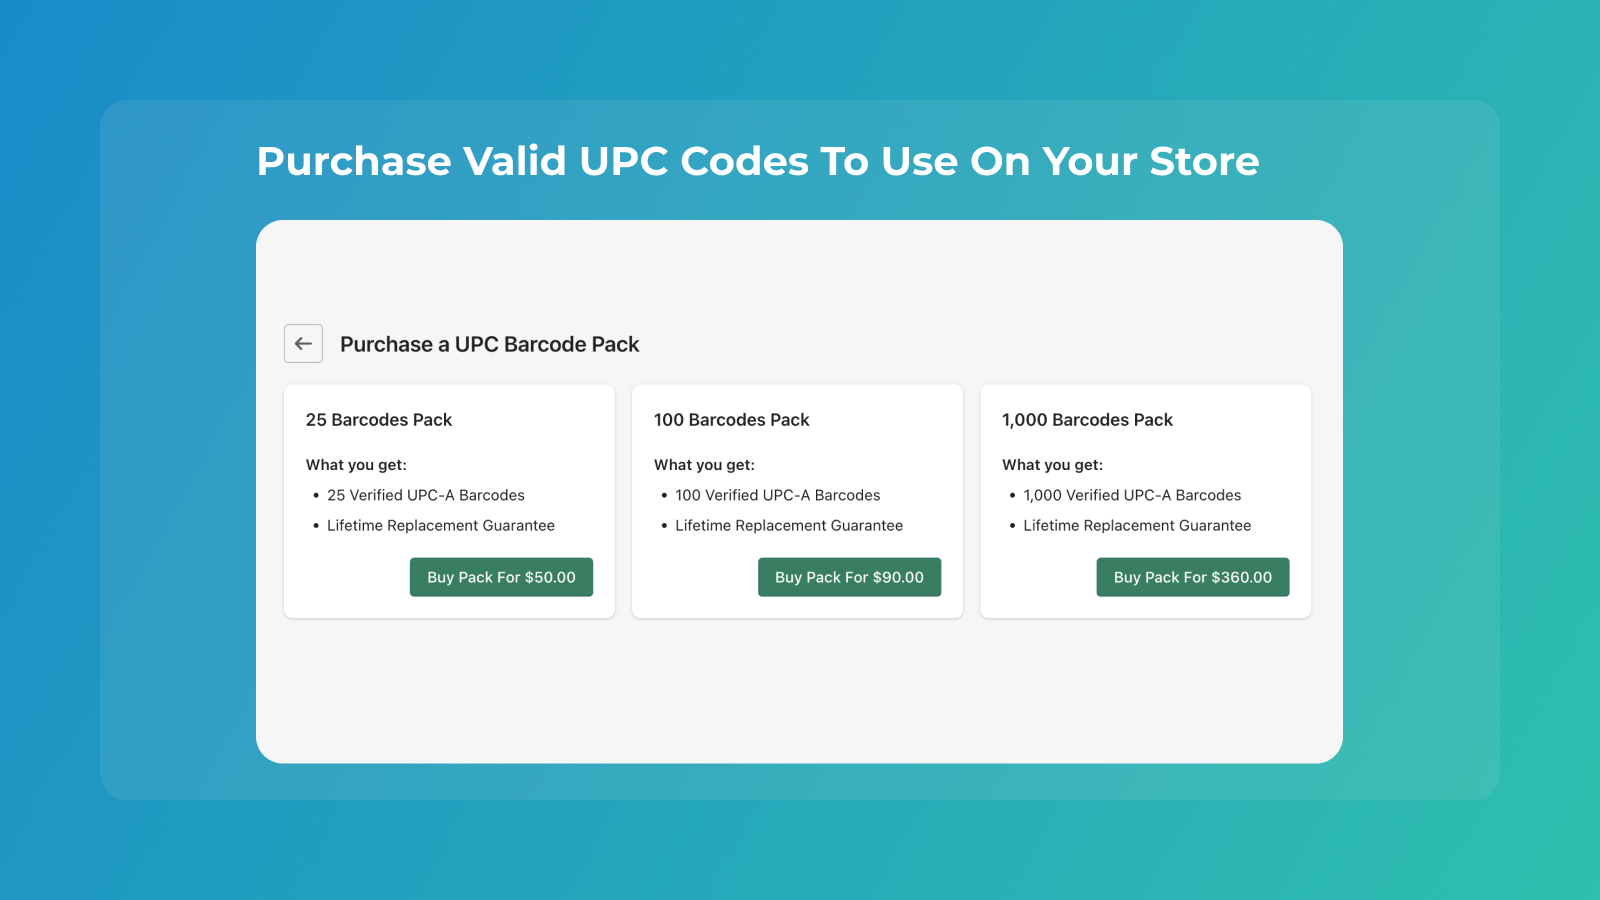 Purchase Valid UPC Codes To Use On Your Store